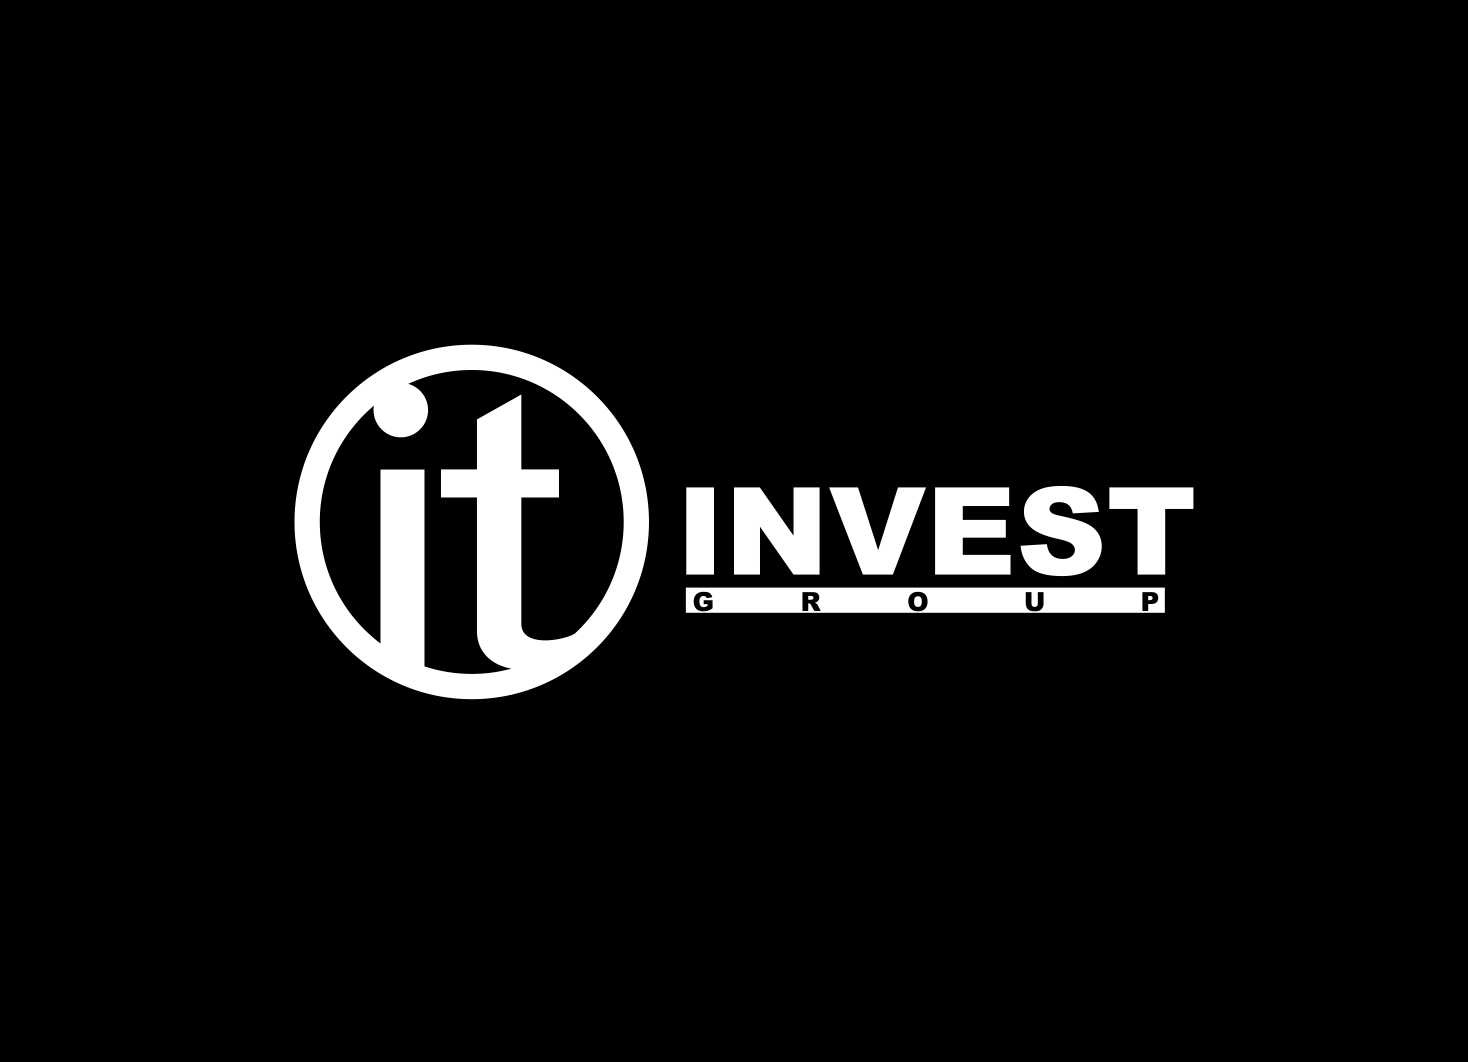 IT INVEST GROUP